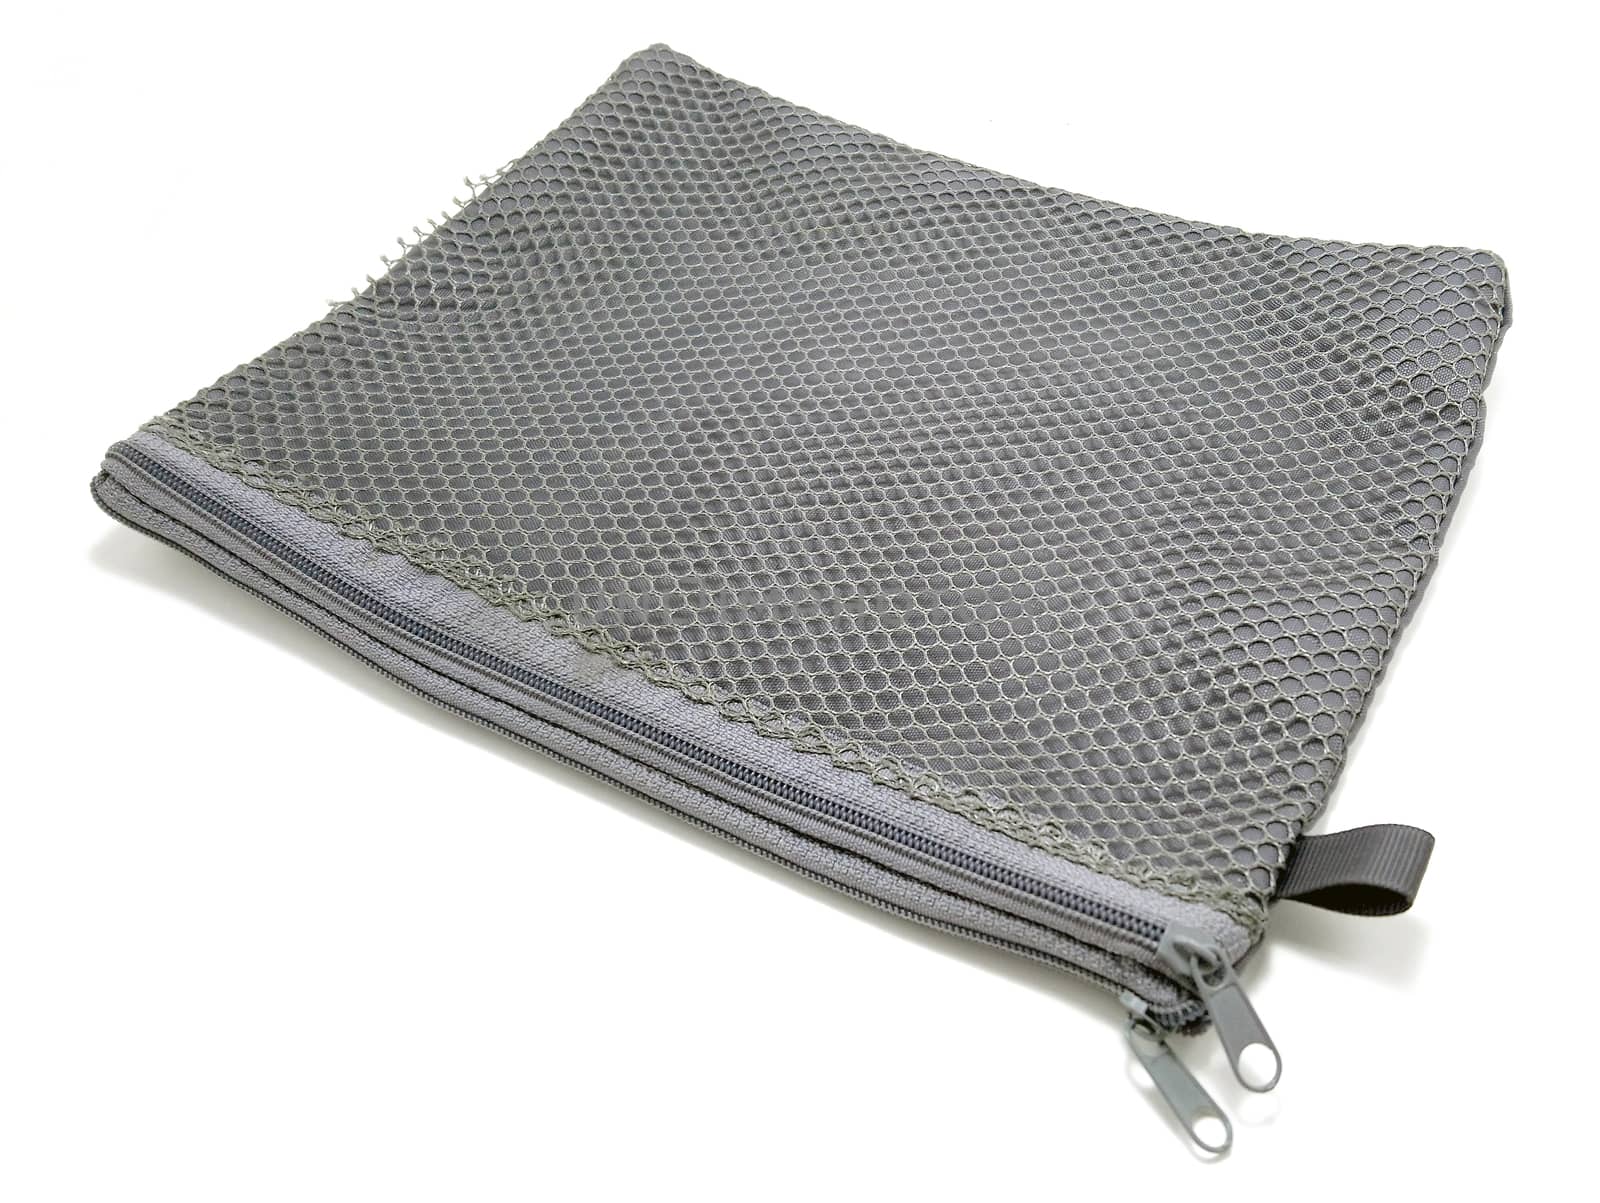 Small gray mesh bag with zipper use to put things inside